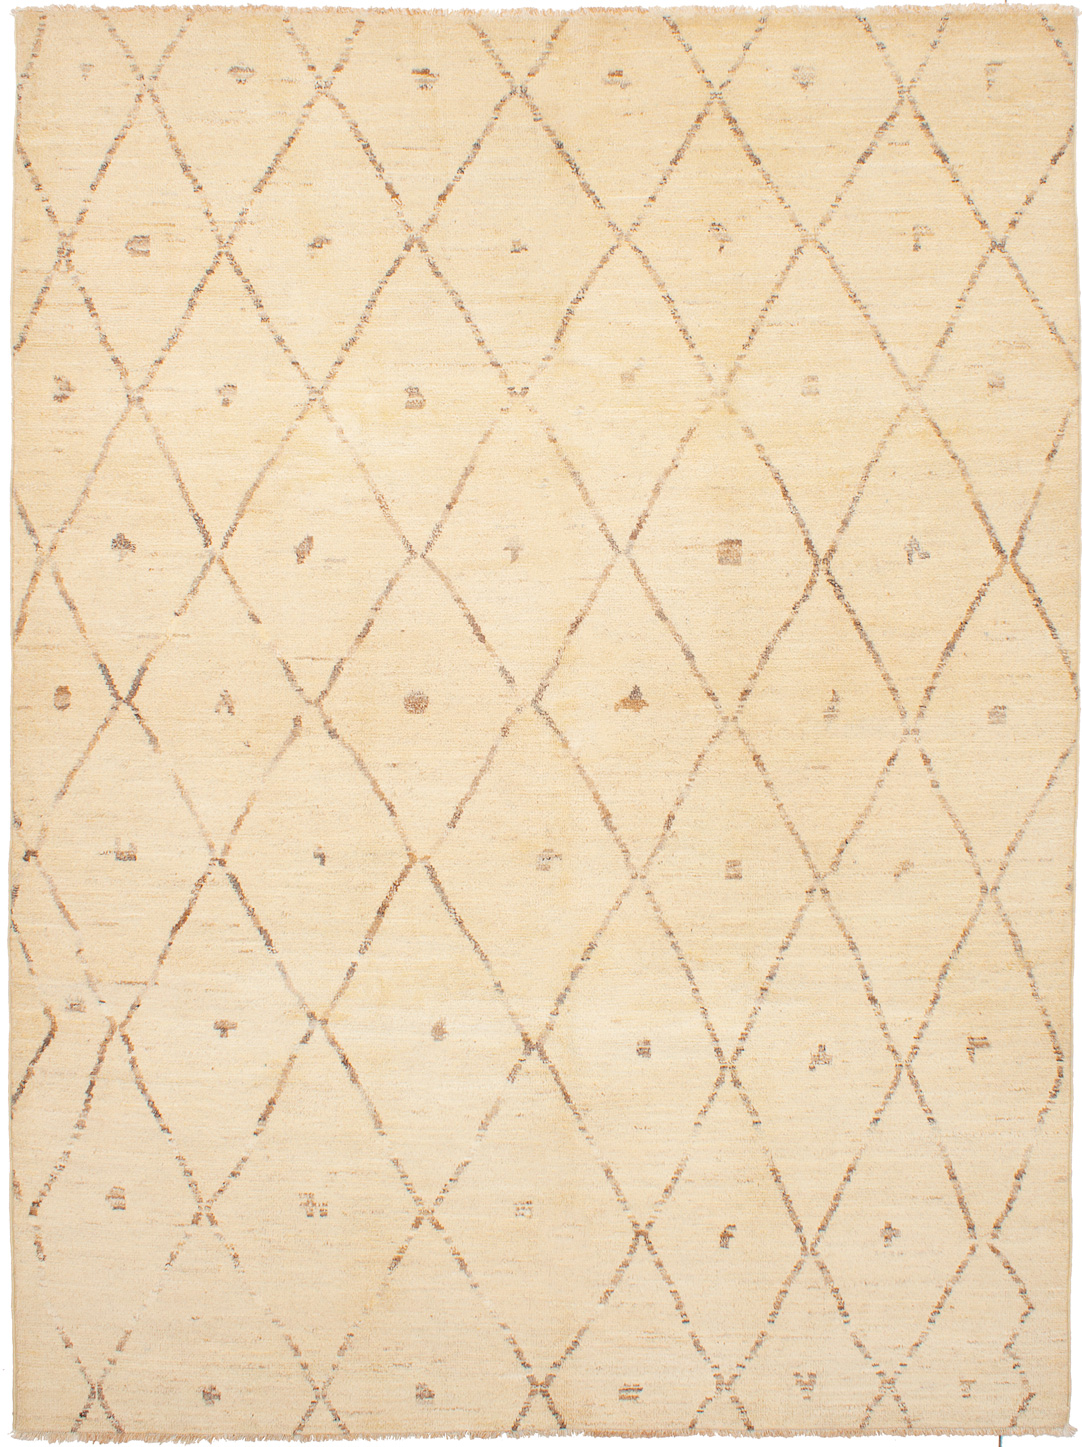 Hand-knotted Tangier Ivory Wool Rug 7'10" x 10'4" Size: 7'10" x 10'4"  